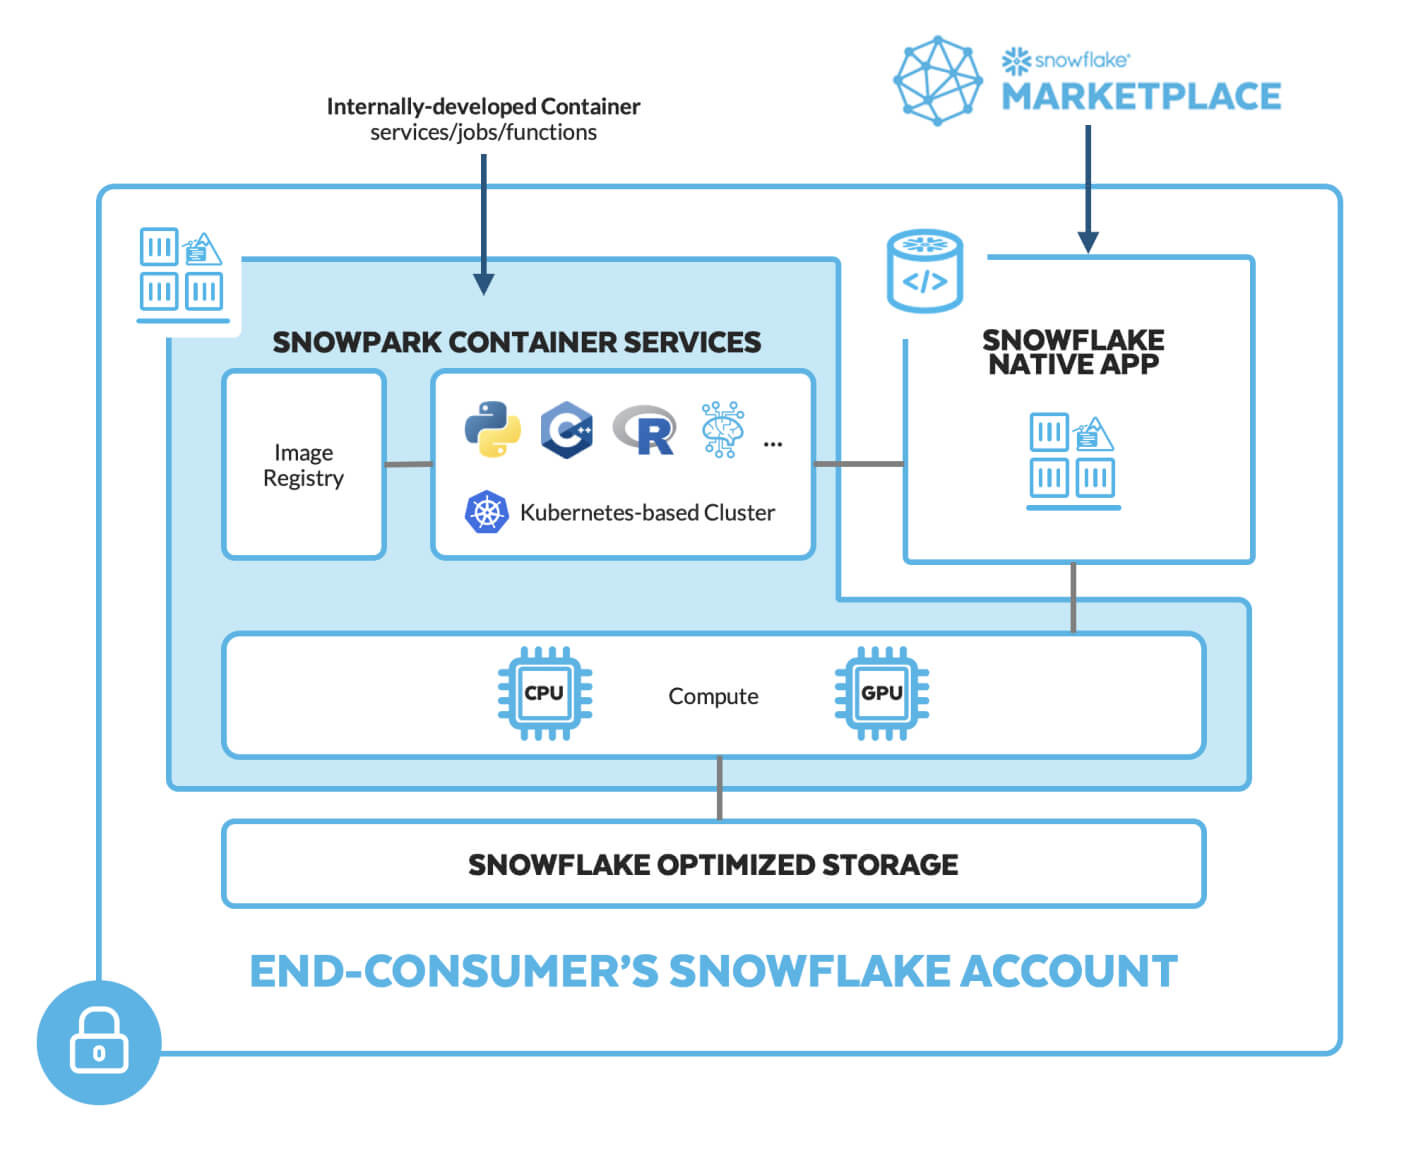 With Snowpark Container Services you can run internally developed data products or install and run sophisticated third-party Snowflake Native Apps all within your Snowflake account.